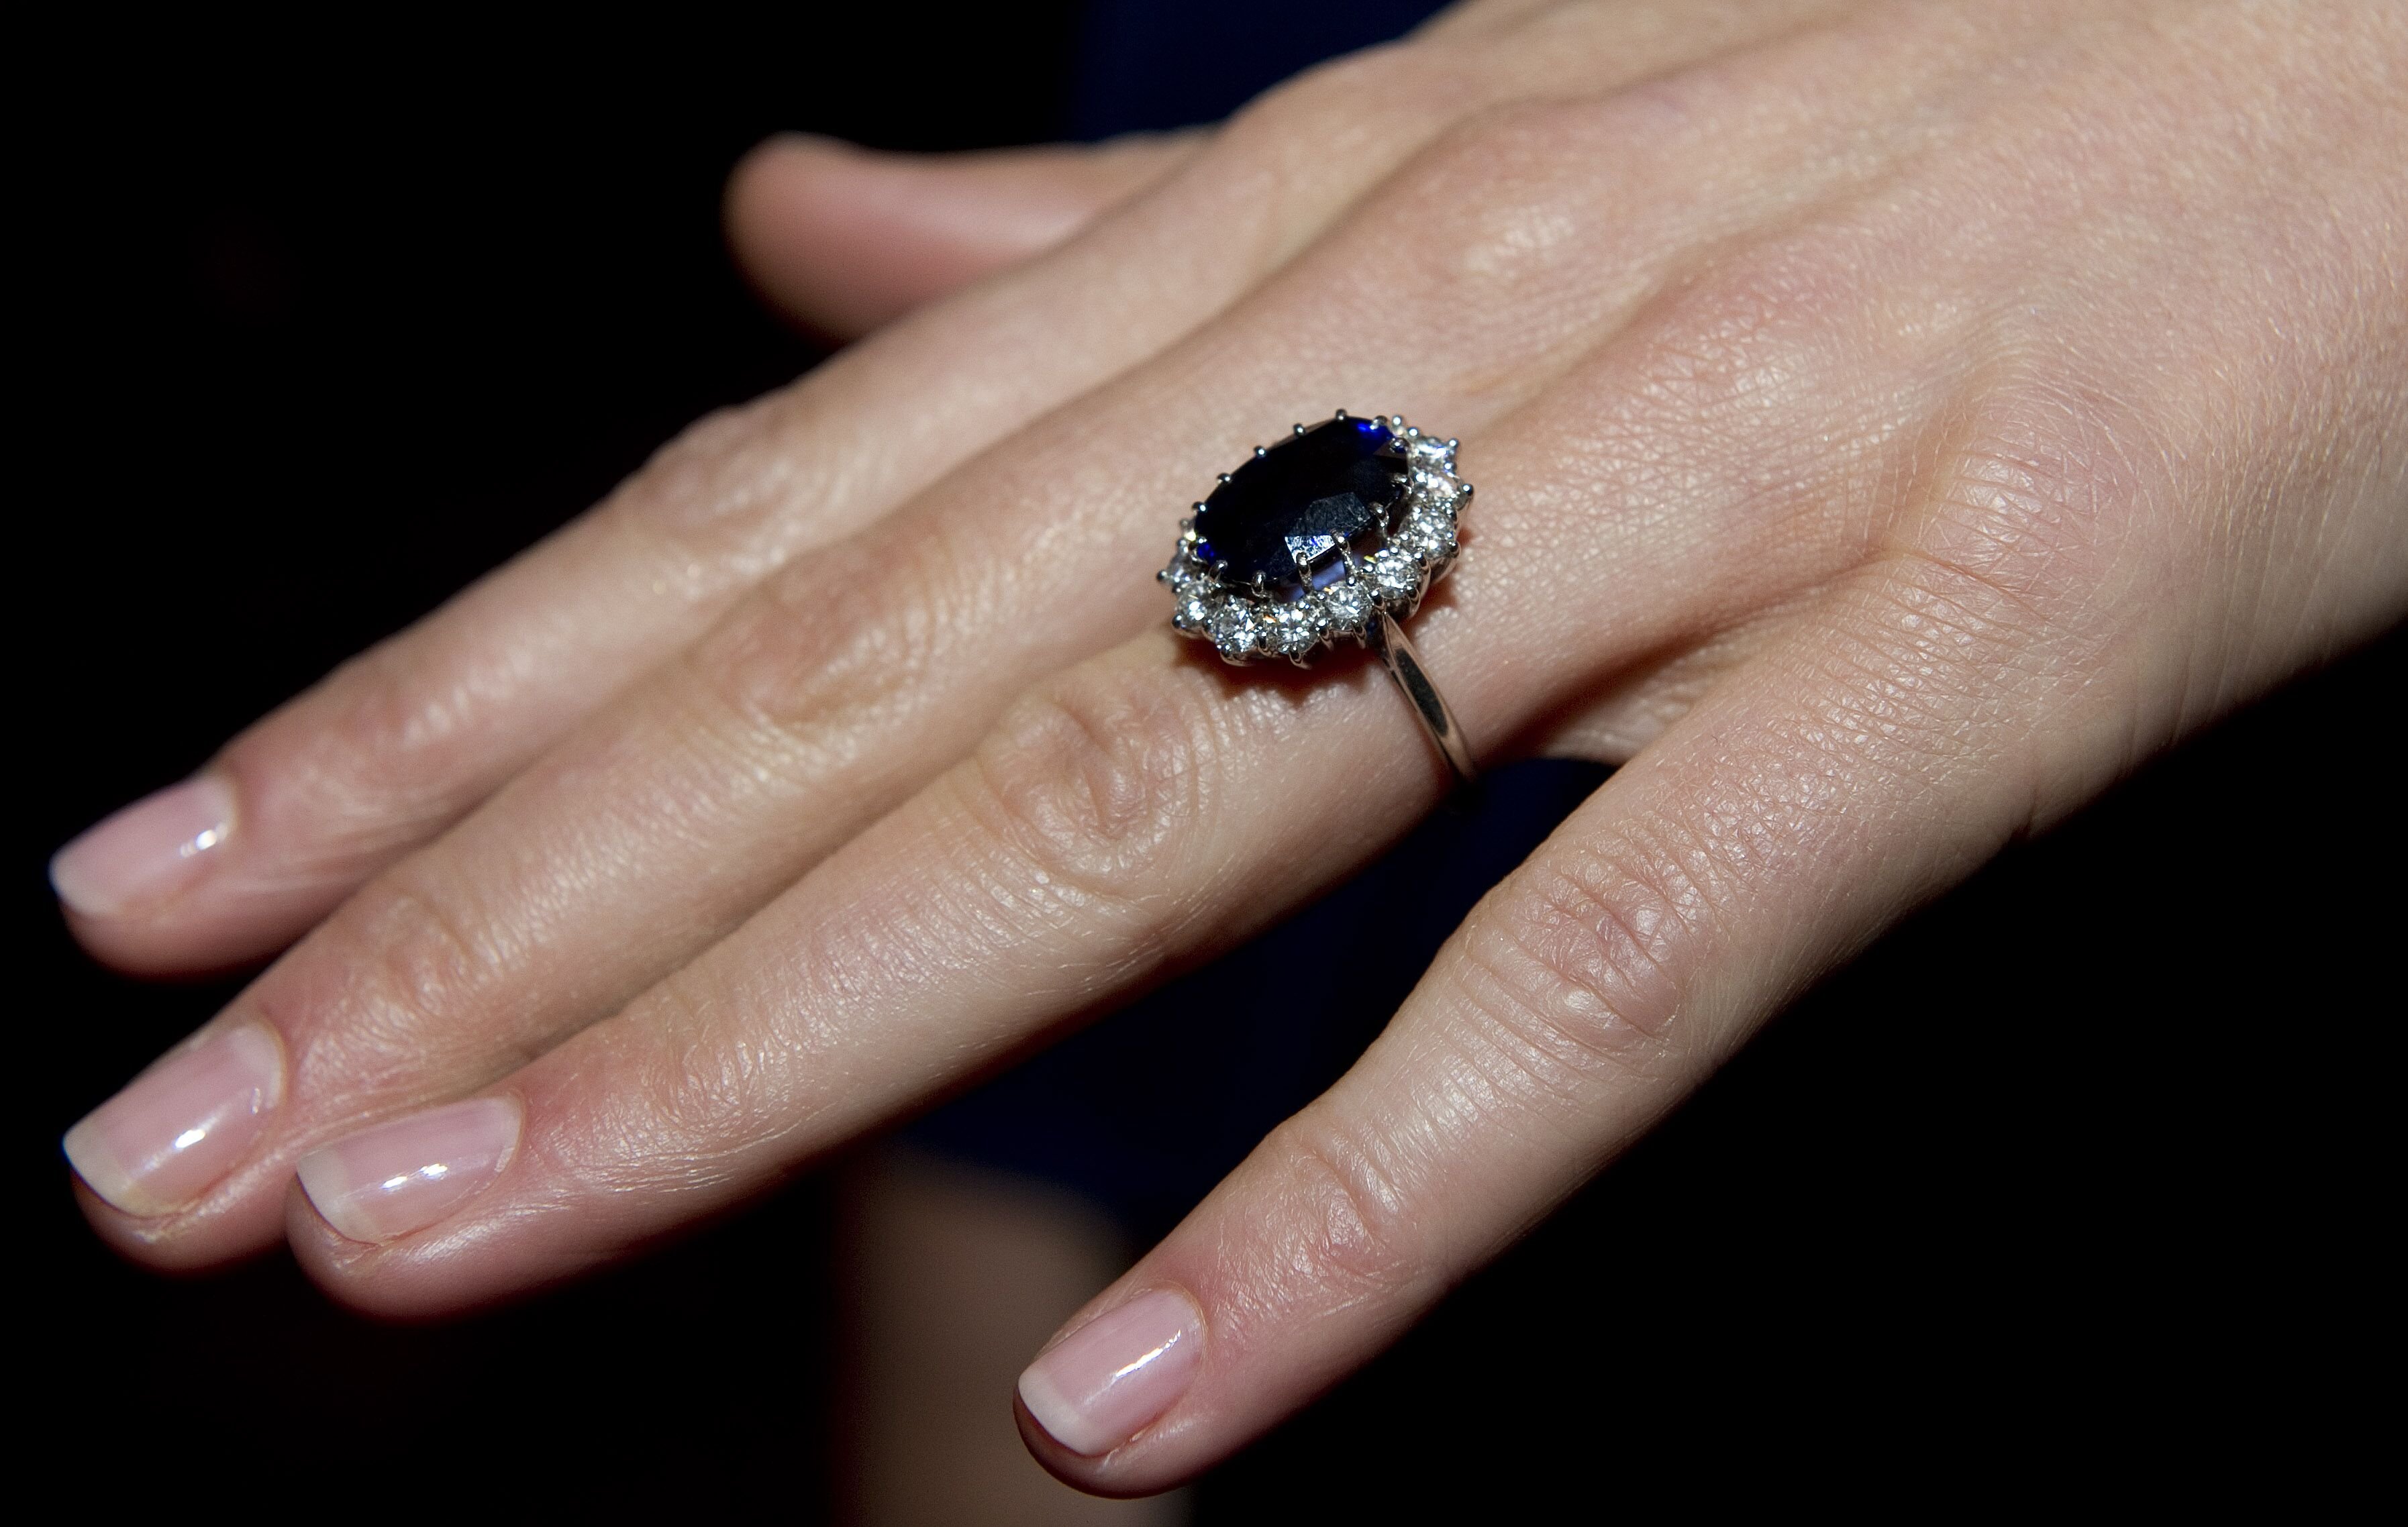 Princess Diana's engagement ring worn by the Duchess of Cambridge in 2009| Source: Getty Images